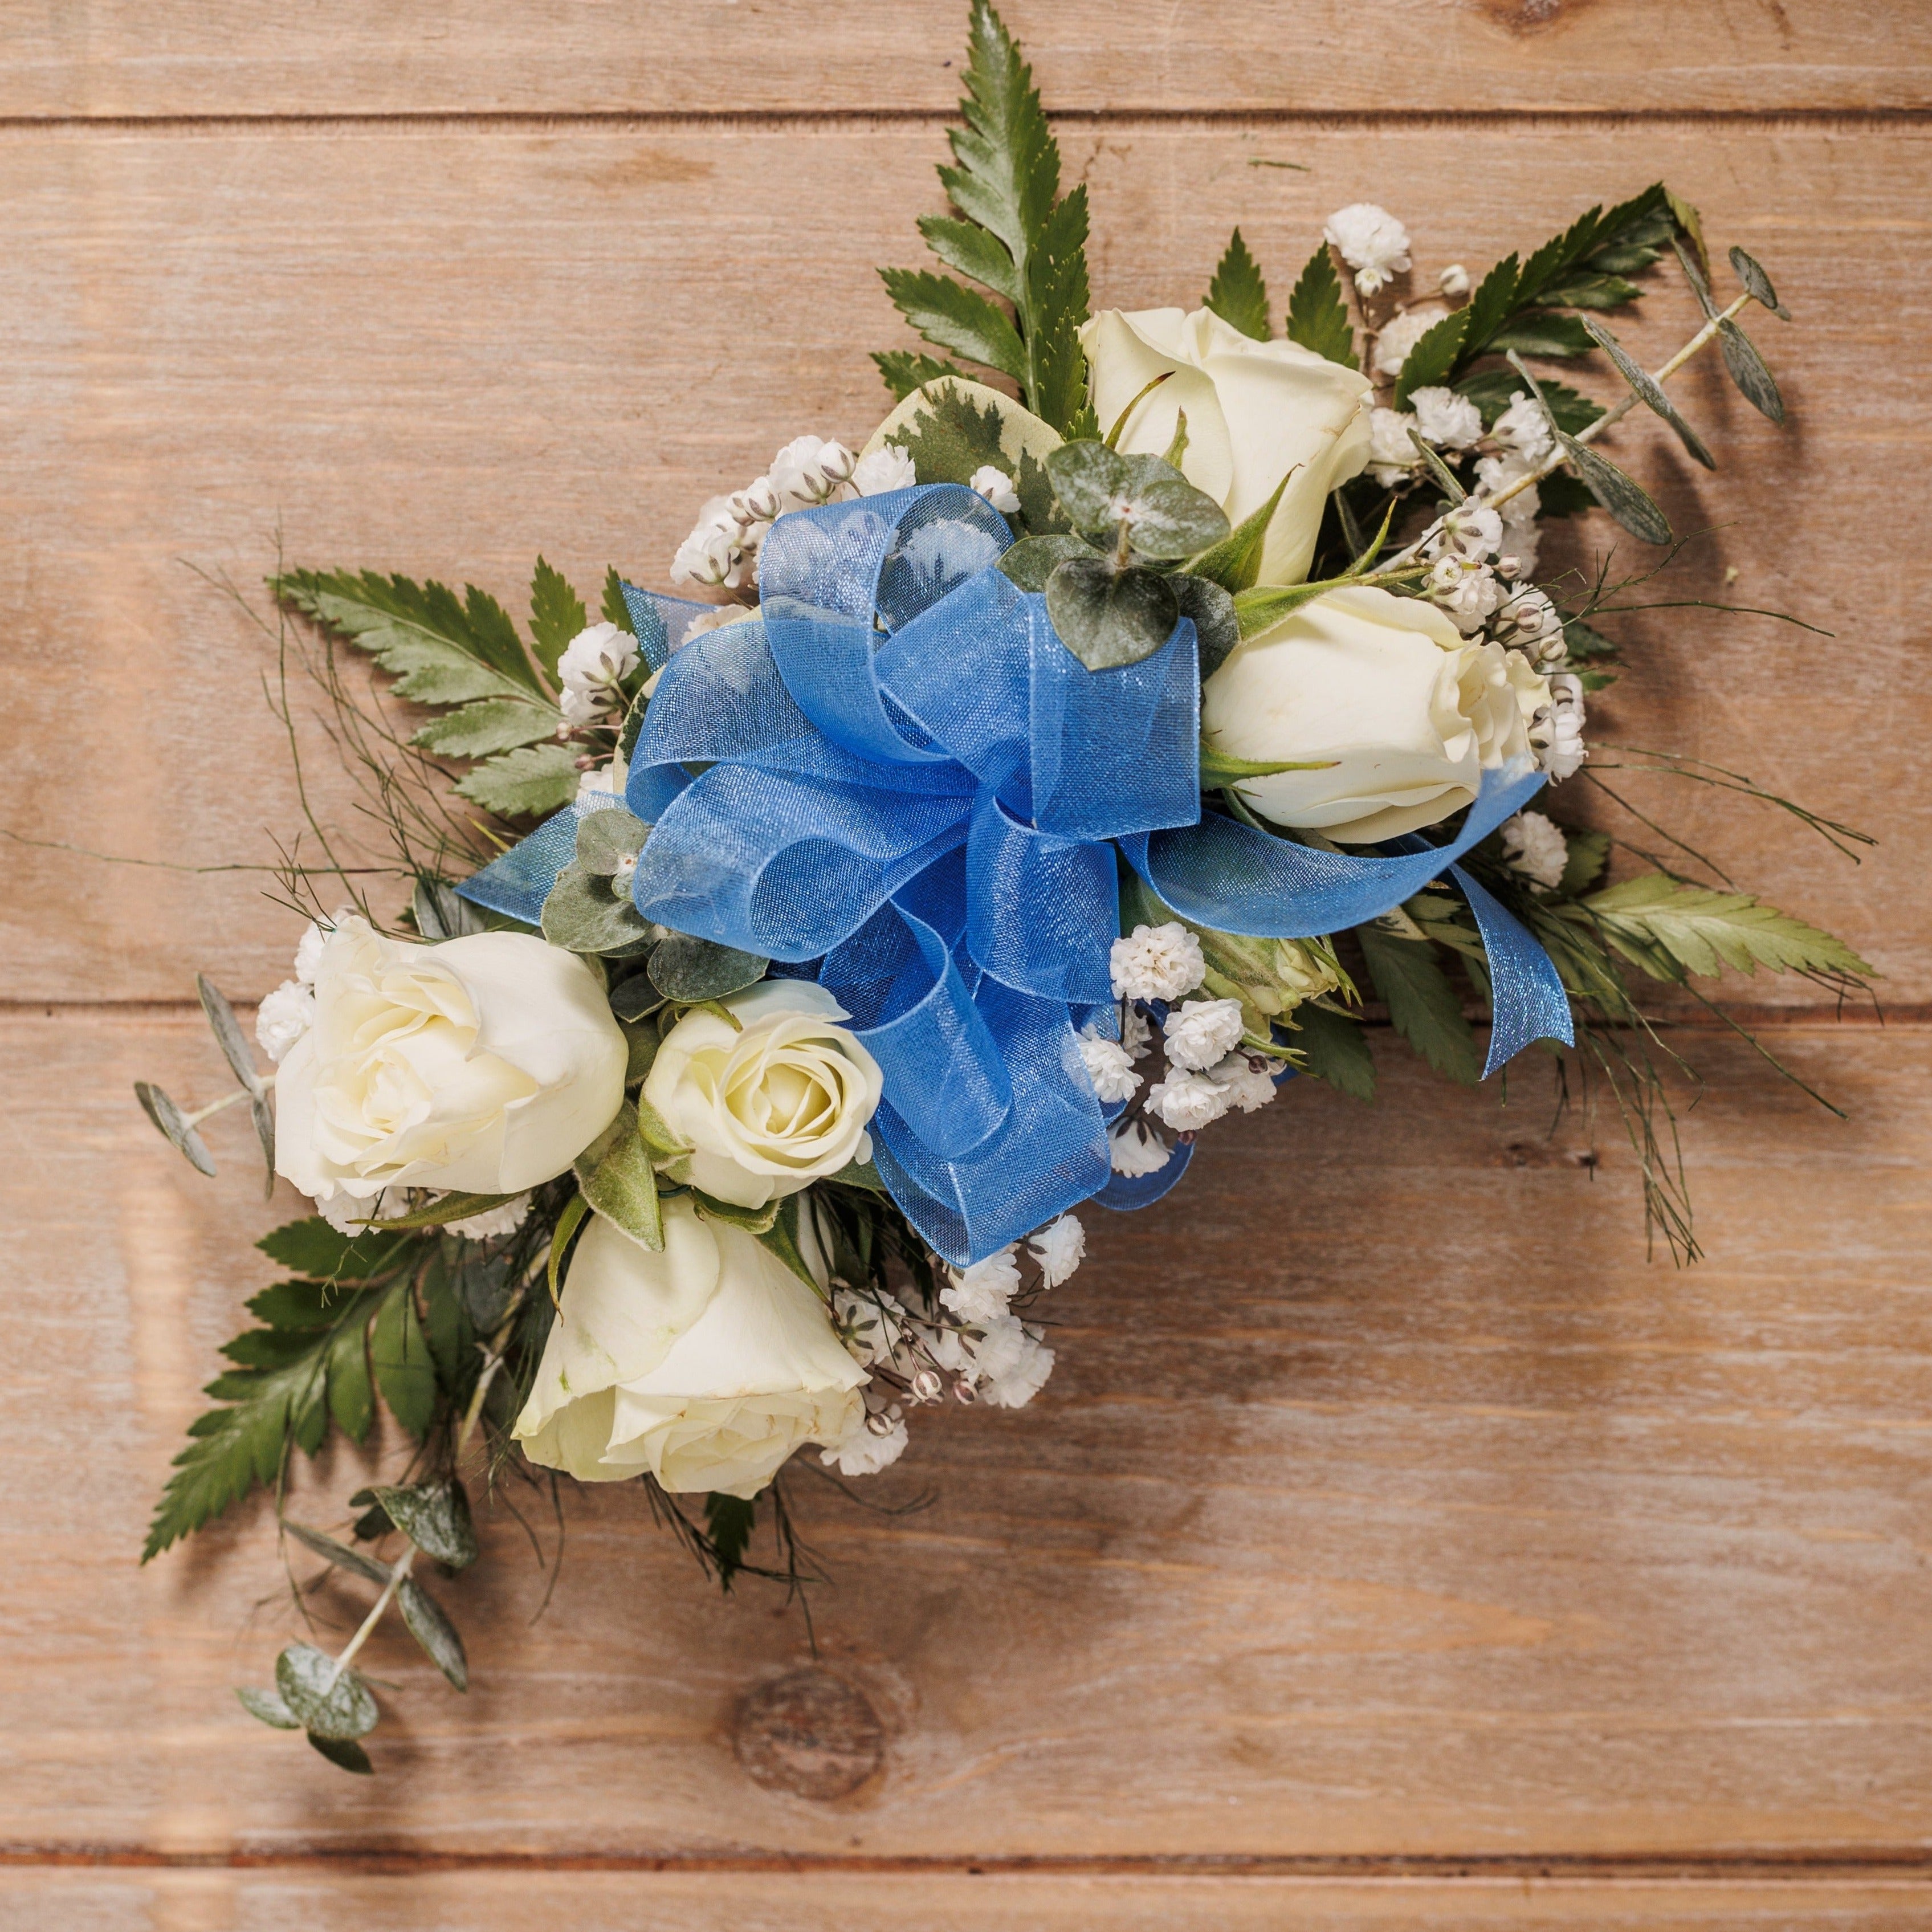 A wrist corsage with white spray roses and blue ribbon.